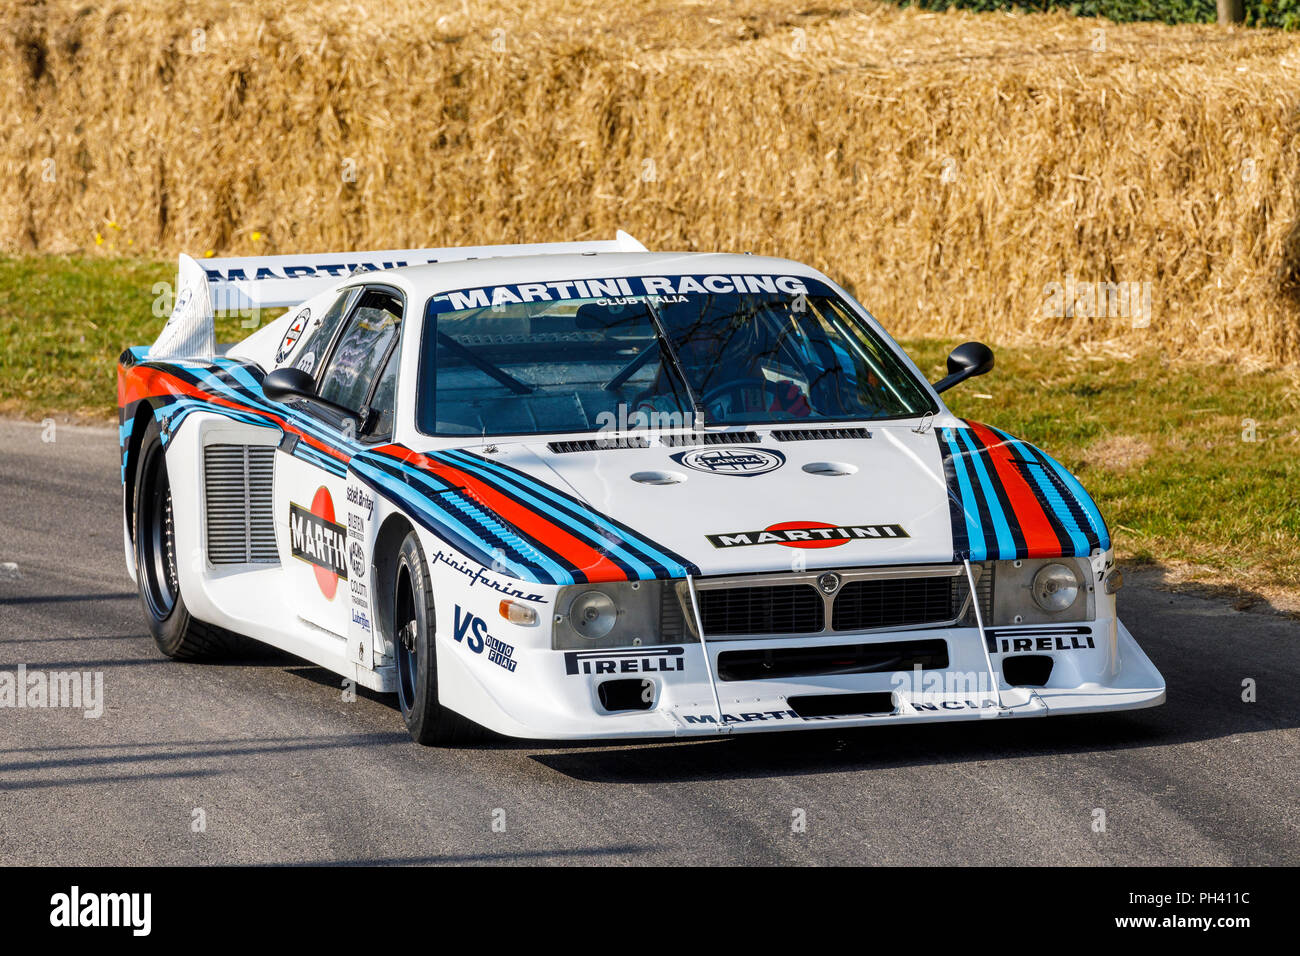 1980 Lancia Beta Montecarlo Turbo Groupe 5 Racer avec chauffeur Stefano Macaluso au Goodwood Festival of Speed 2018, Sussex, UK. Banque D'Images